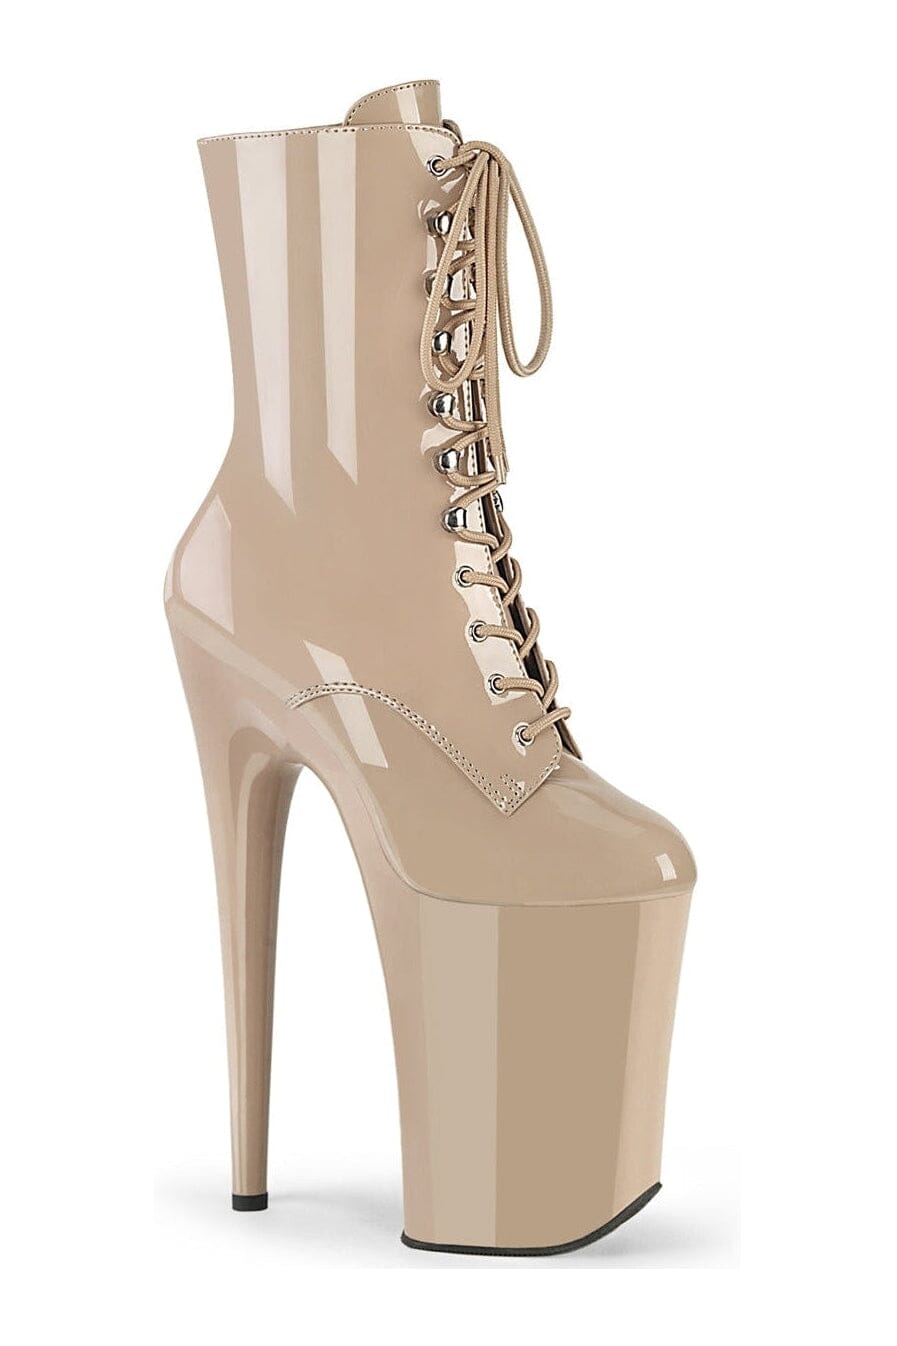 INFINITY-1020 Nude Patent Ankle Boot-Ankle Boots- Stripper Shoes at SEXYSHOES.COM